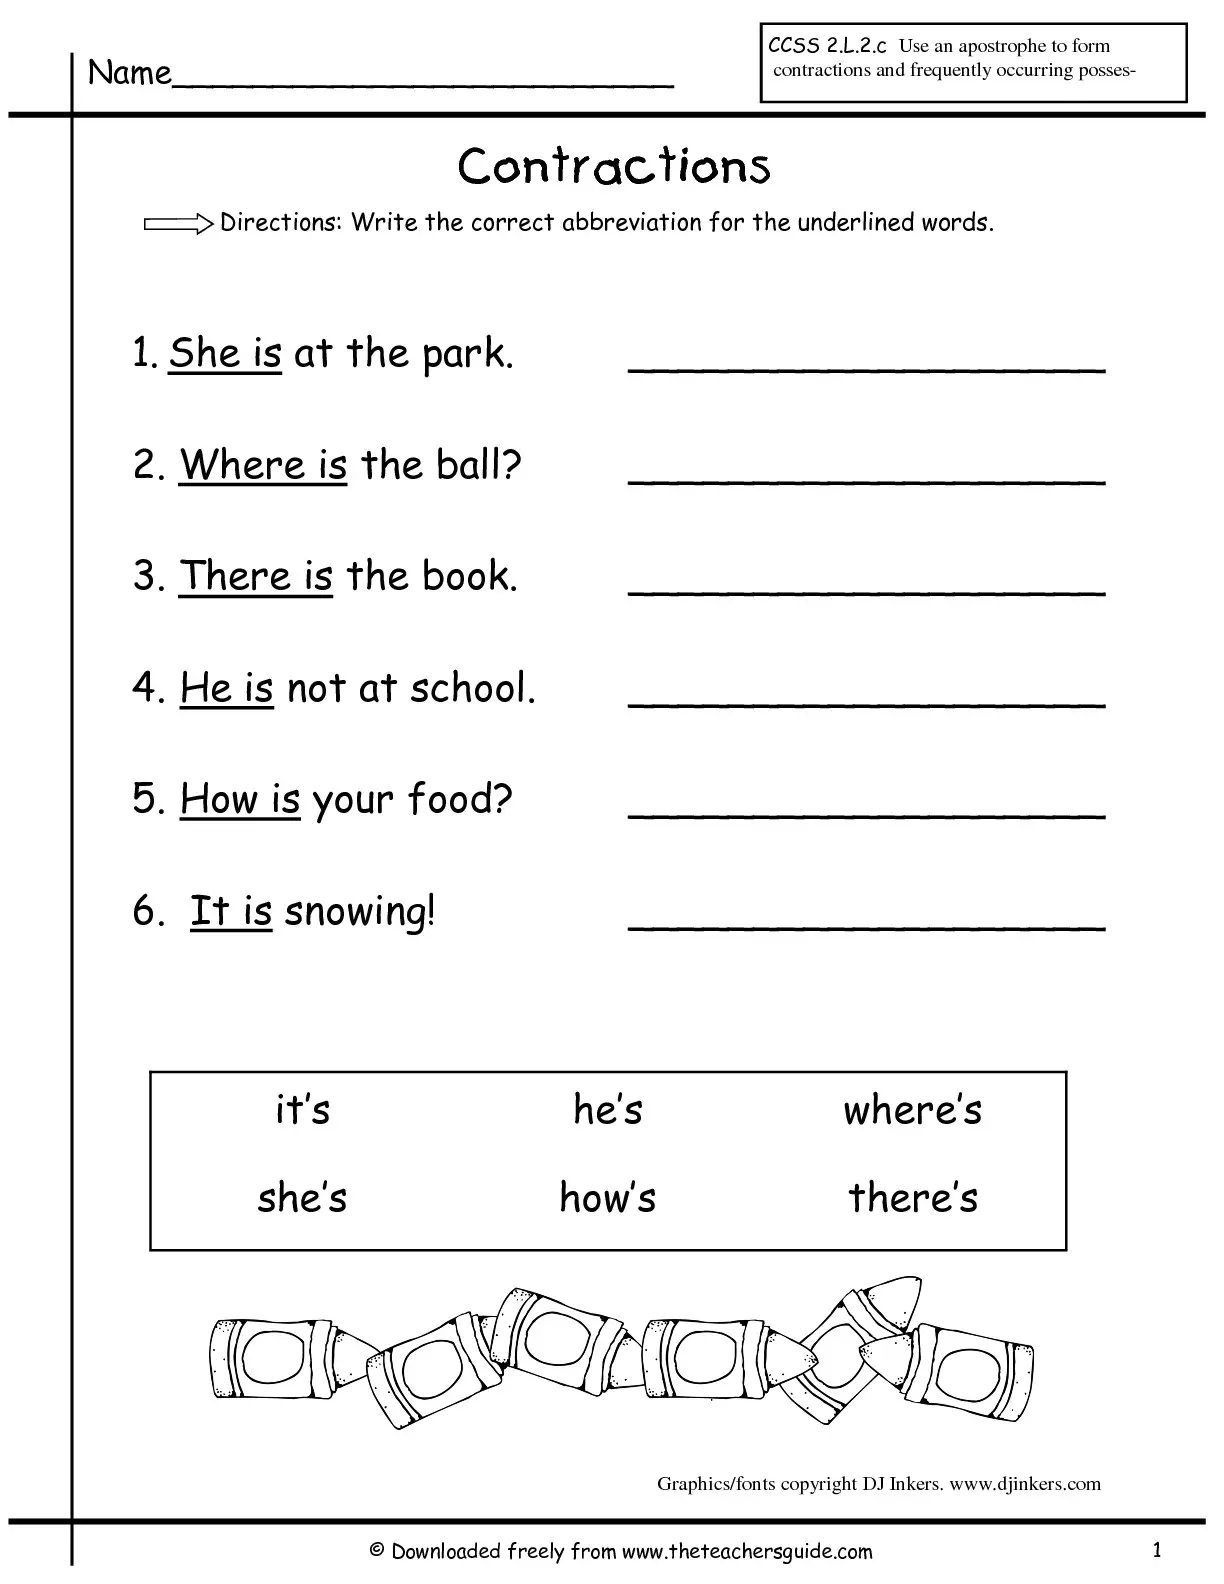 11 Contractions Worksheets for Improving Your Grammar - Kitty Baby Regarding Contractions Works
heet 2nd Grade